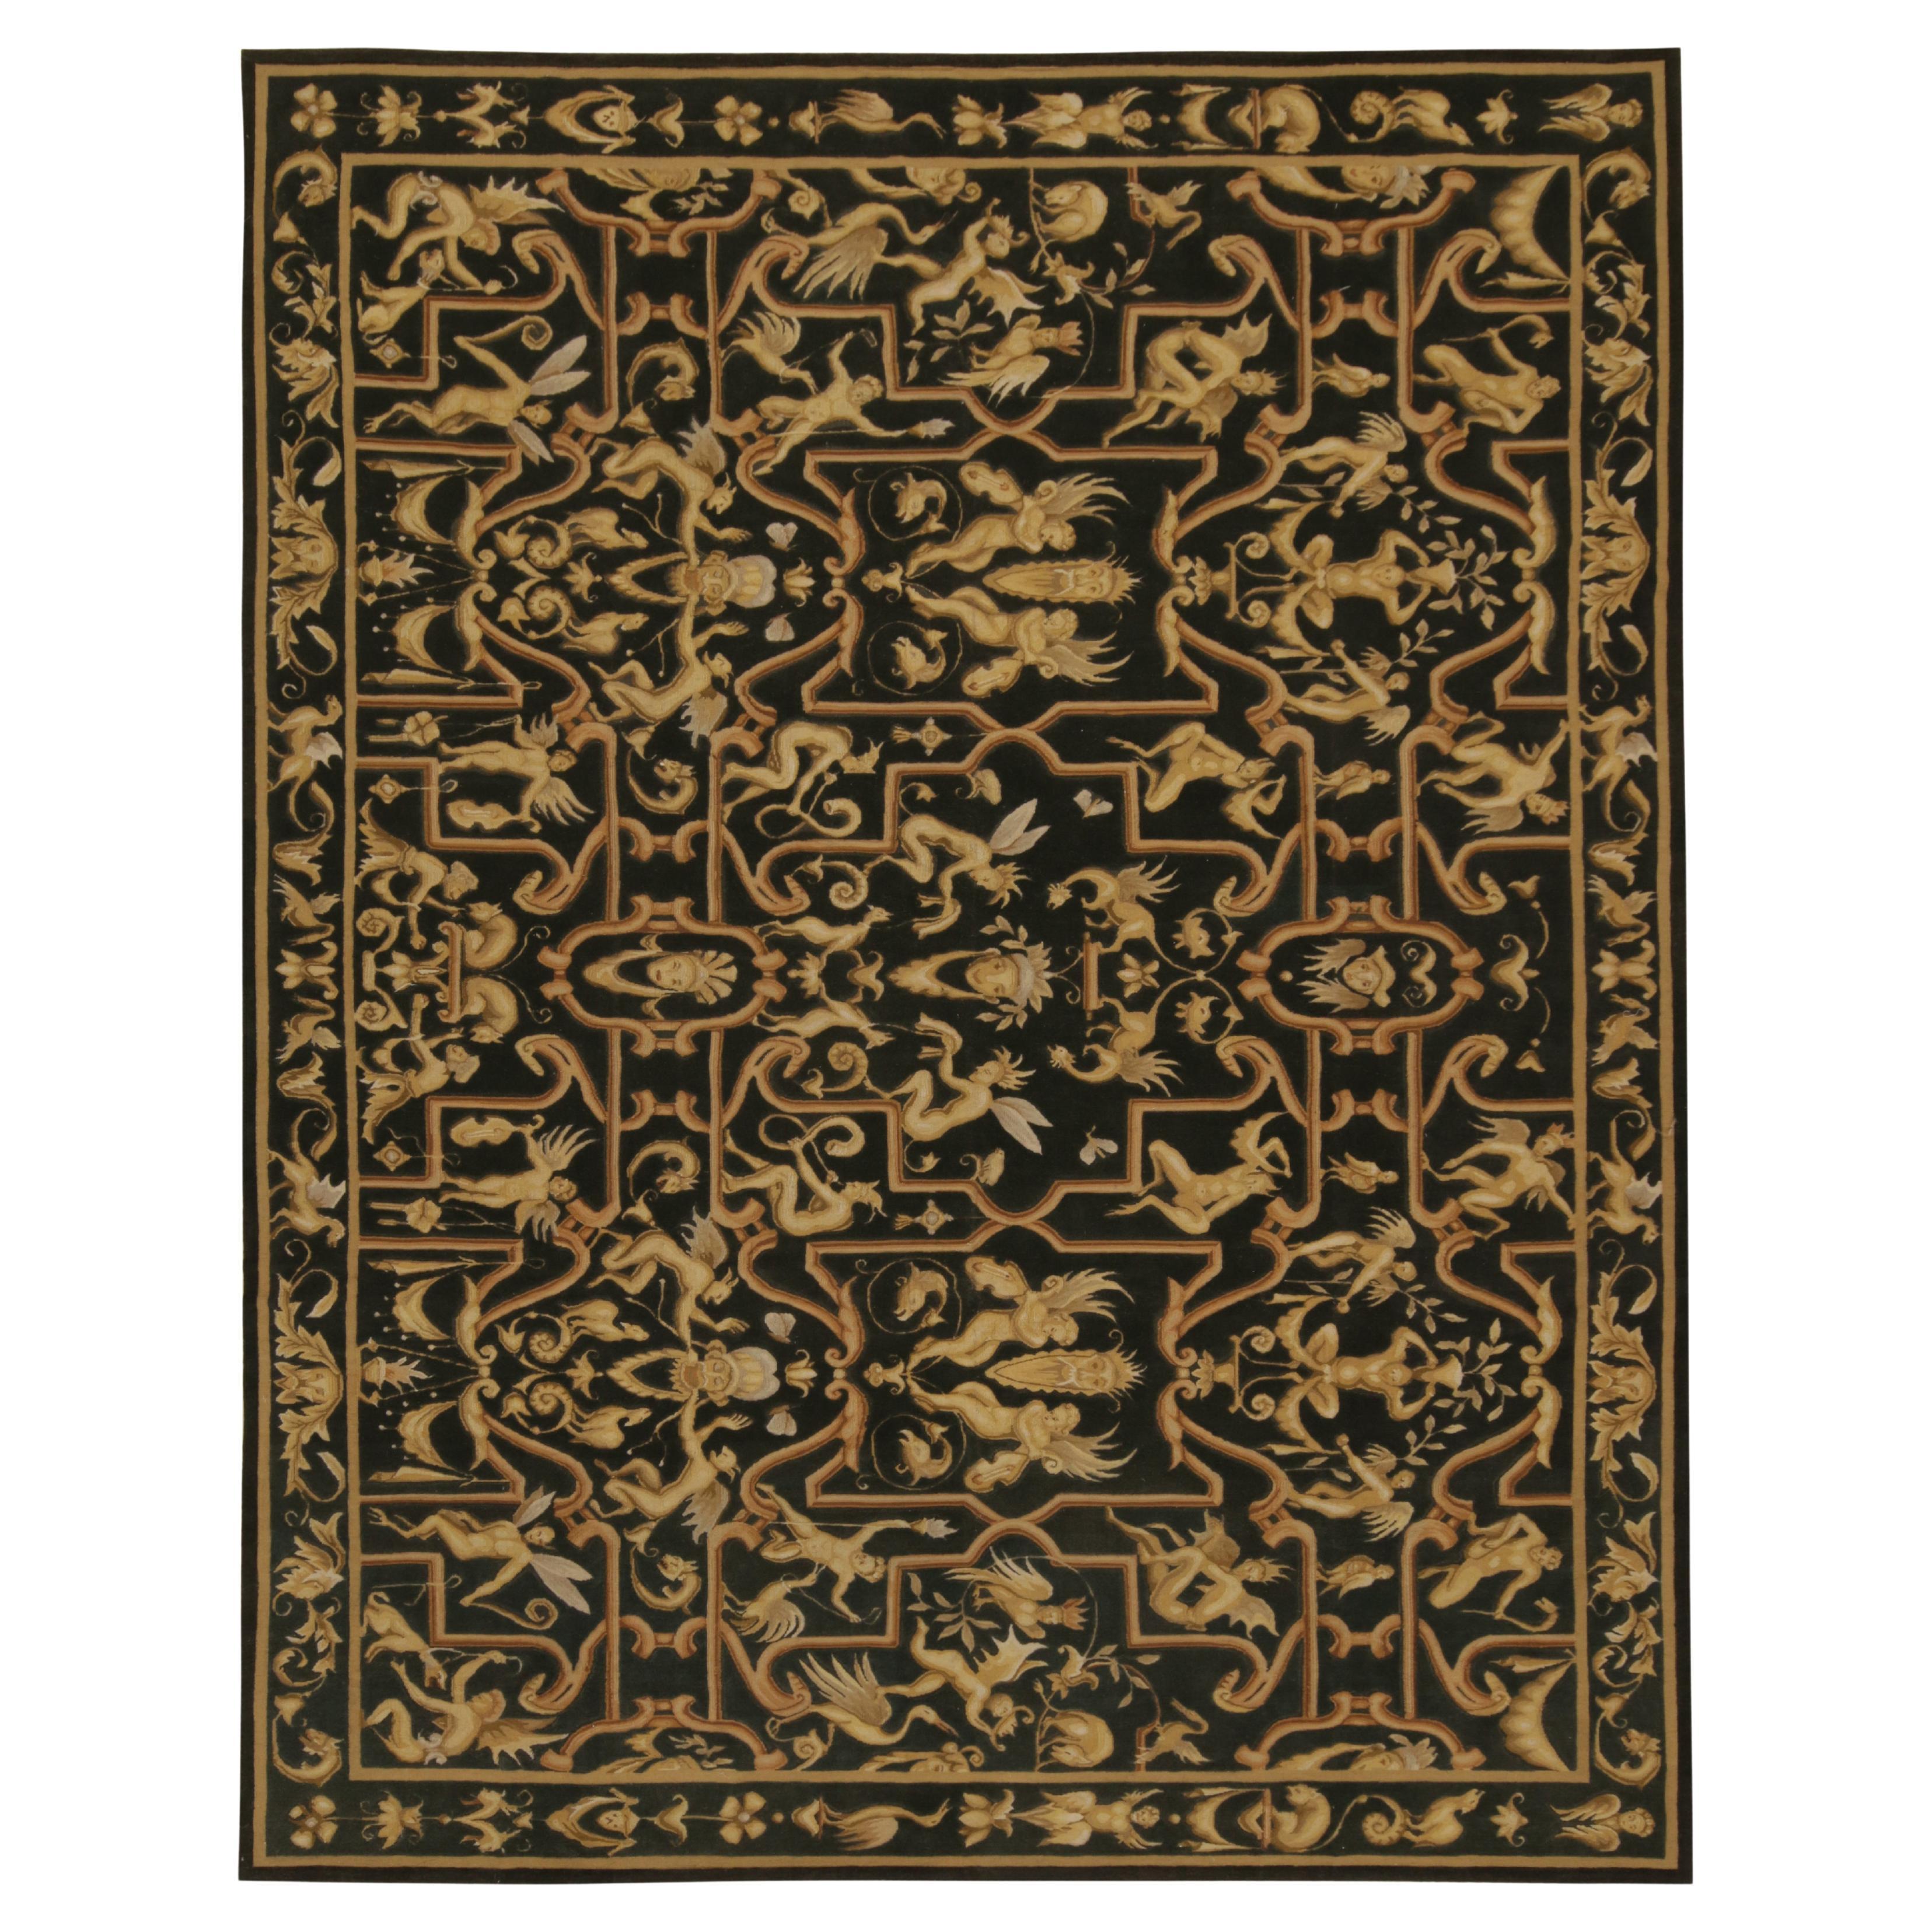 Rug & Kilim’s European Tudor style Flat Weave in Black with Gold Pictorial For Sale